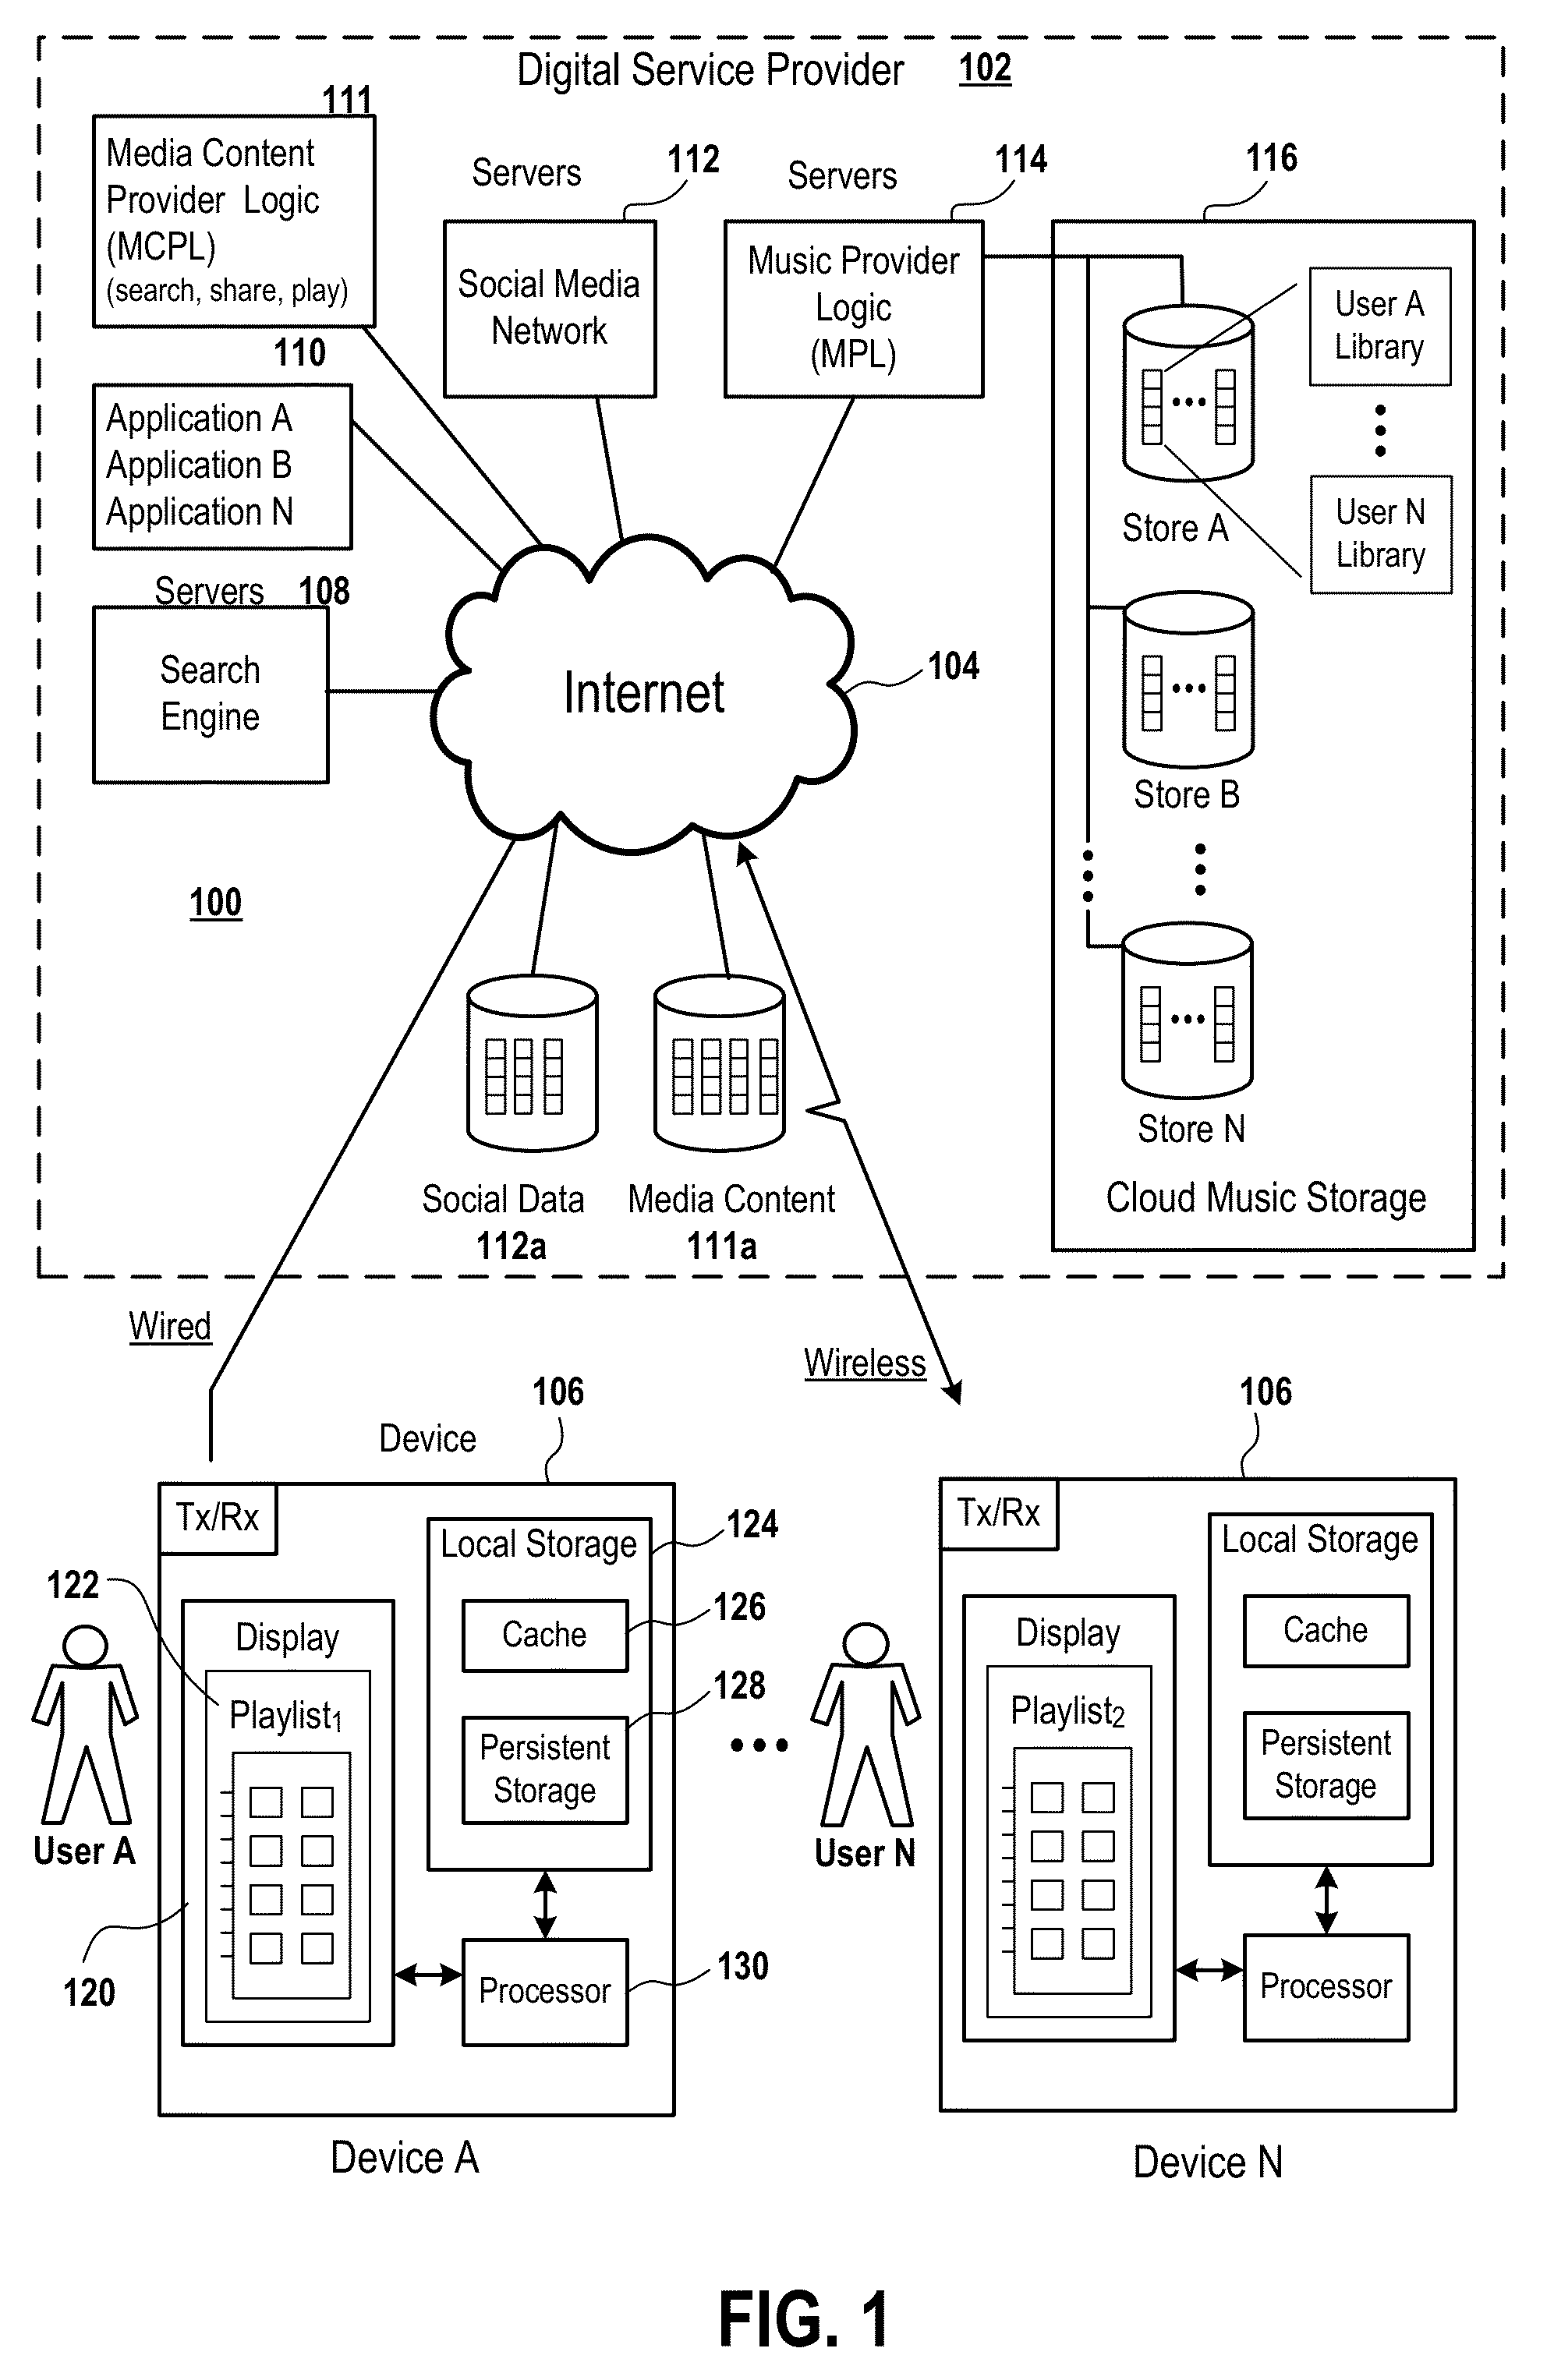 Methods and systems for ordering and voting on shared media playlists